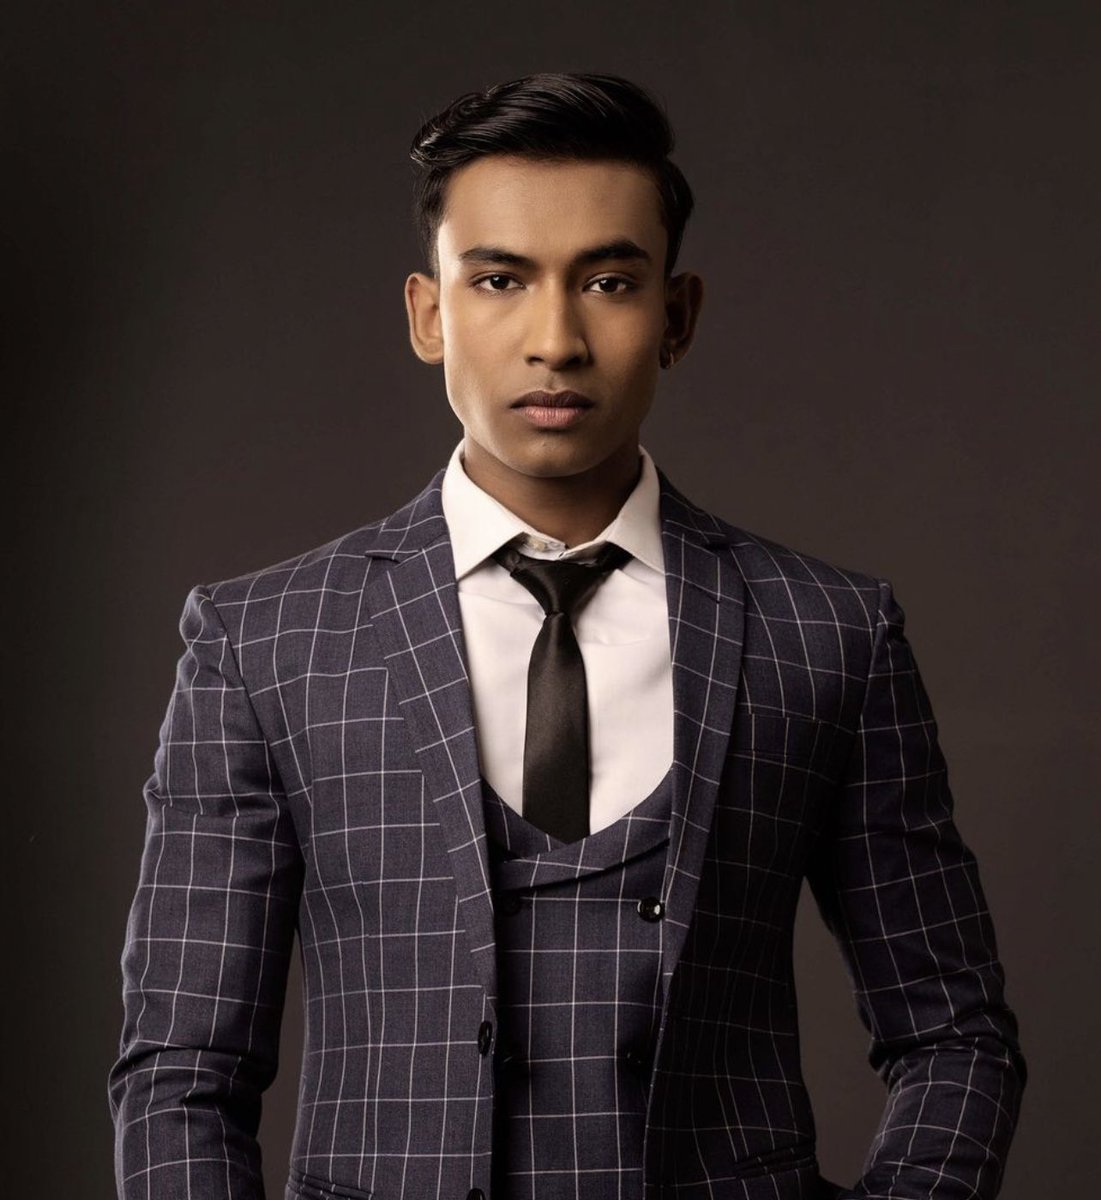 Elegance is not about being noticed. It is about being remembered.✨
#misterandmissnational
#misterandmissnationalnepal
#misterandmissnationalnepal 
#mistersupranational
#misssupranationalnepal
#misssupranationalnepal 
#misterinternational
#aspirational #inspirational